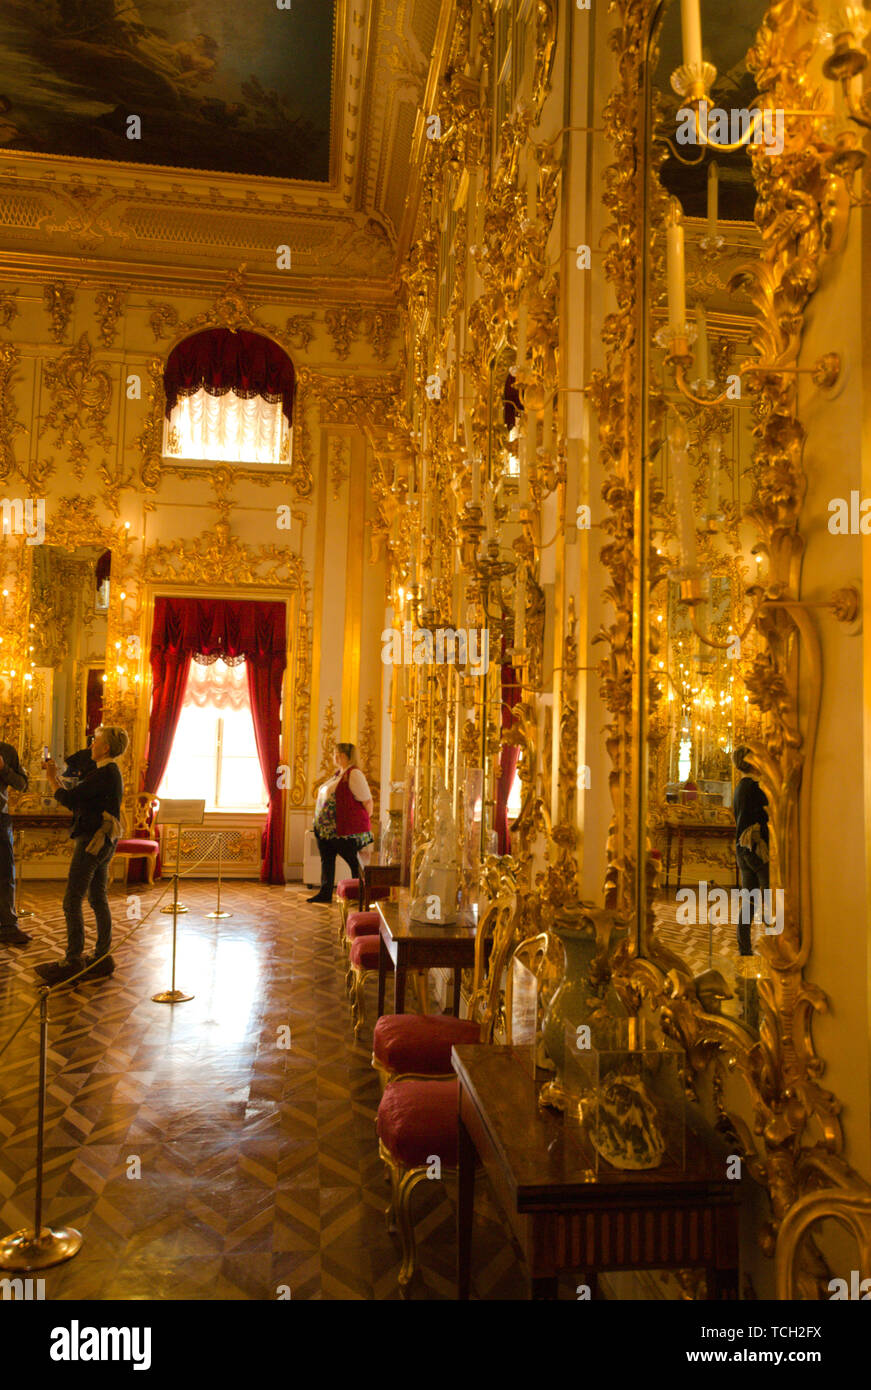 Oppulent interior of the Grand Palace of Peterhof in Petrodvorets, St. Petersburg, Russia. Stock Photo